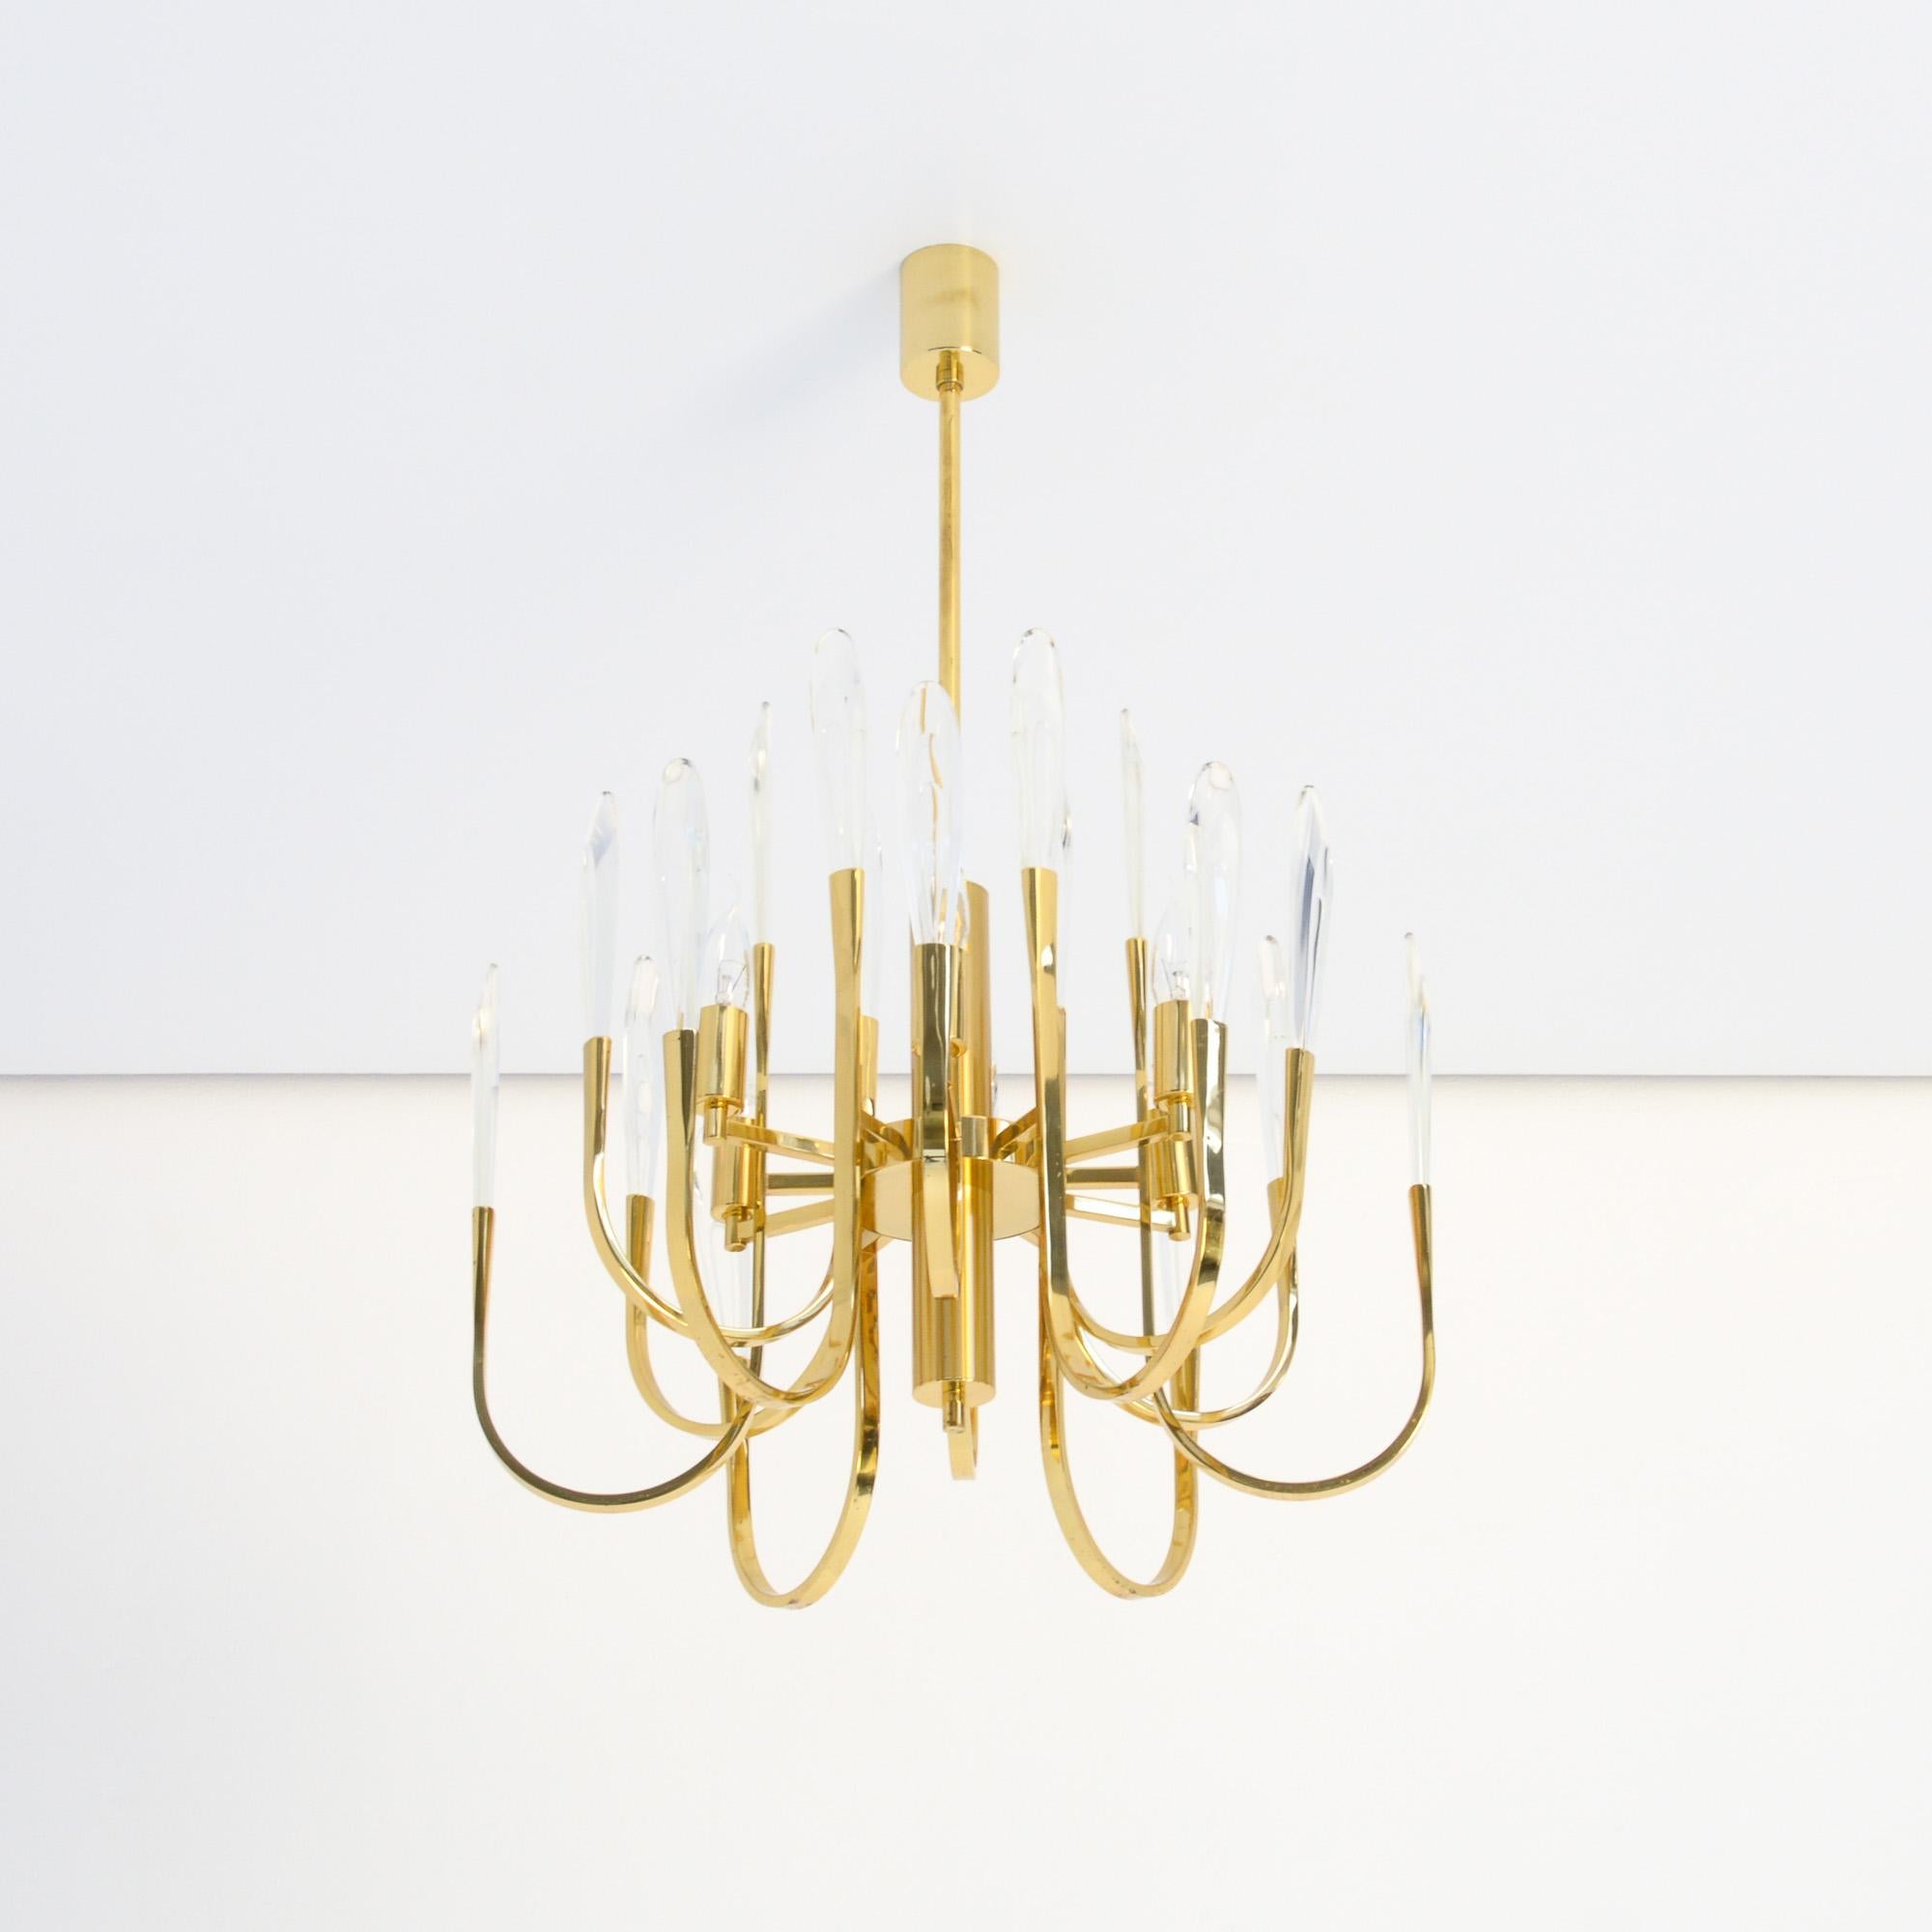 Late 20th Century Classical Boulanger Chandelier